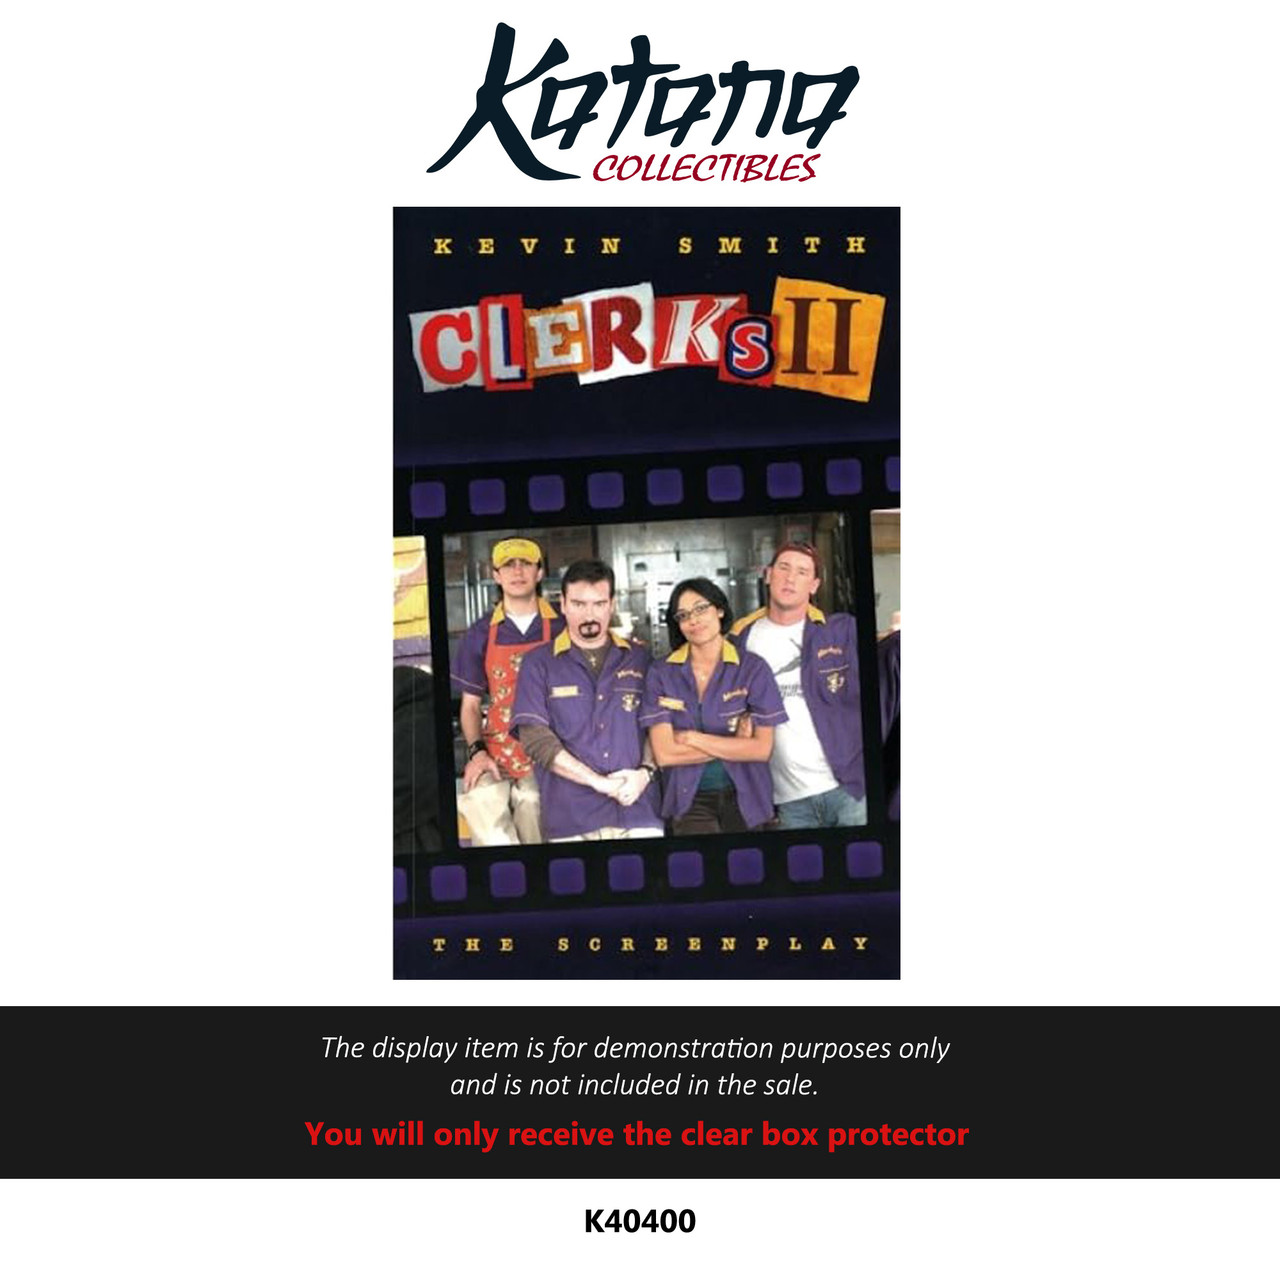 Katana Collectibles Protector For Clerks 2: The Screenplay